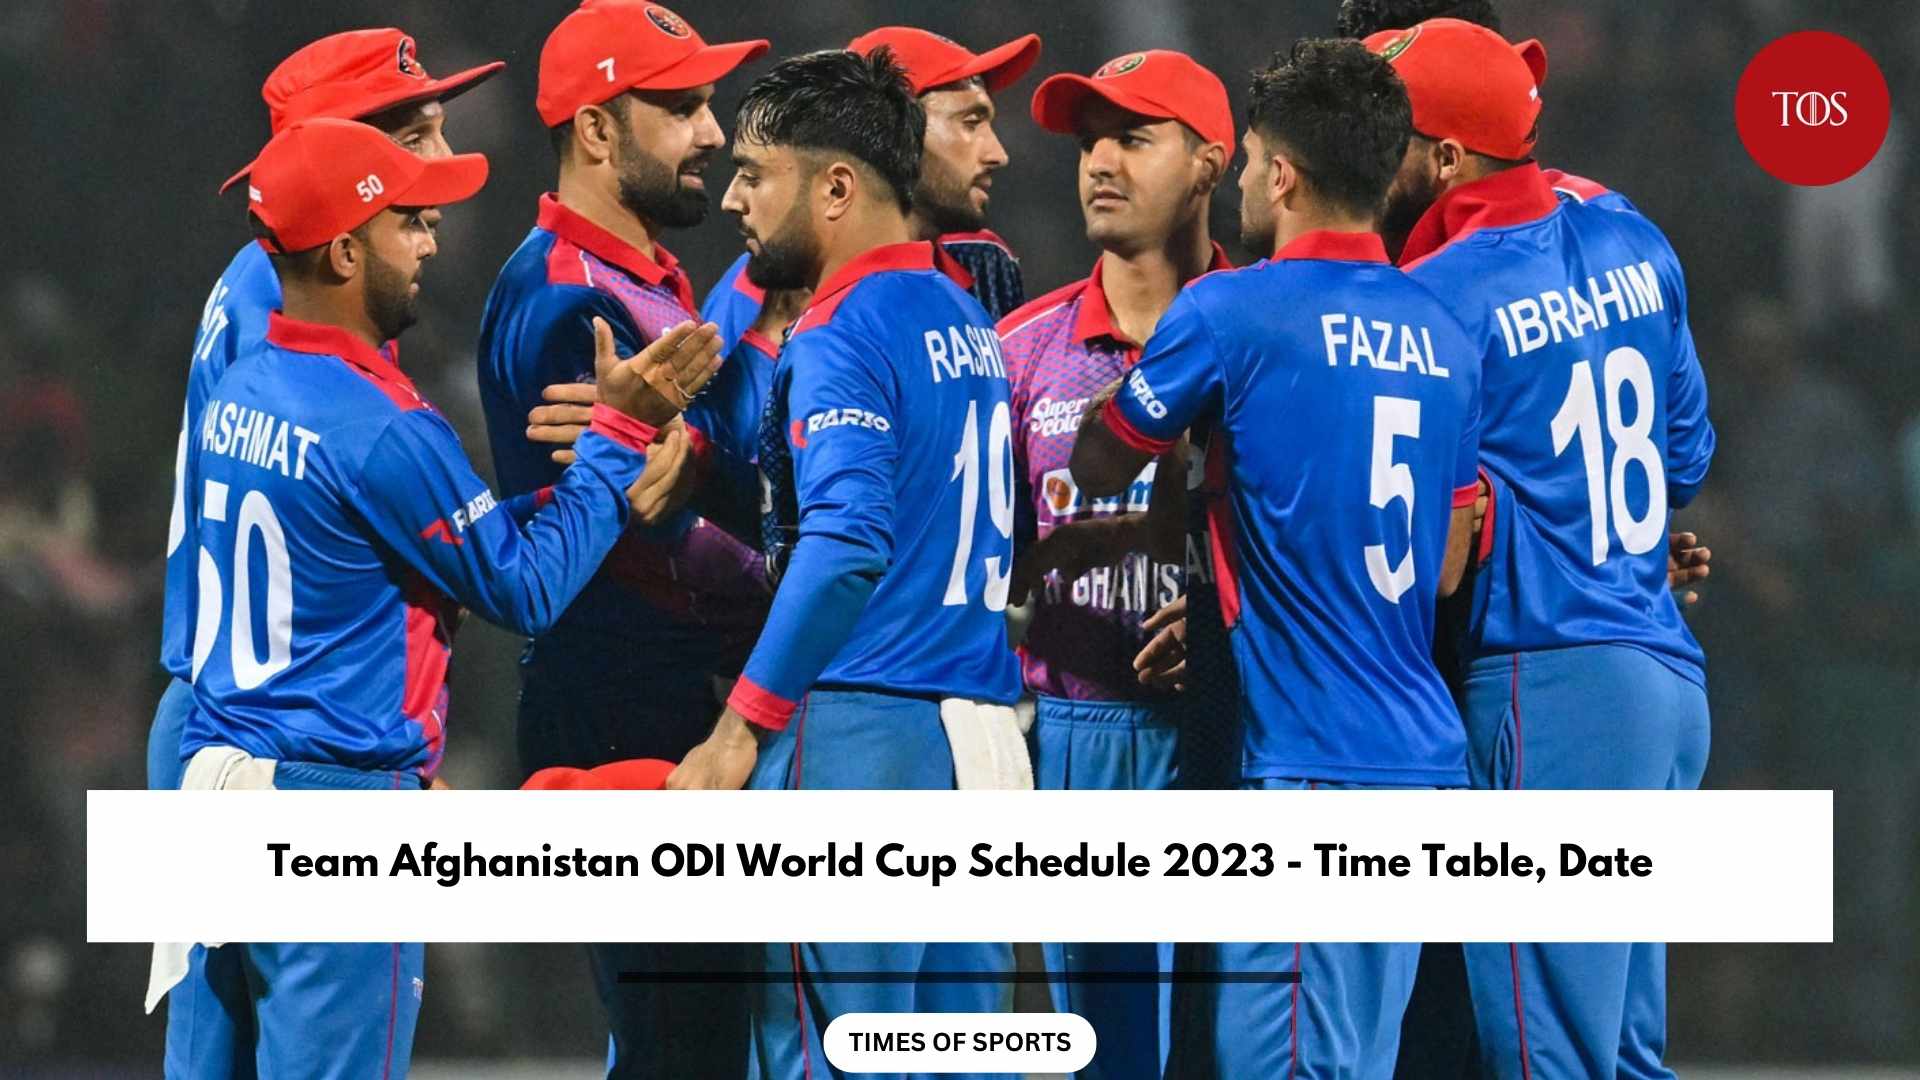 Team Afghanistan ODI World Cup Schedule 2023 Time Table, Date